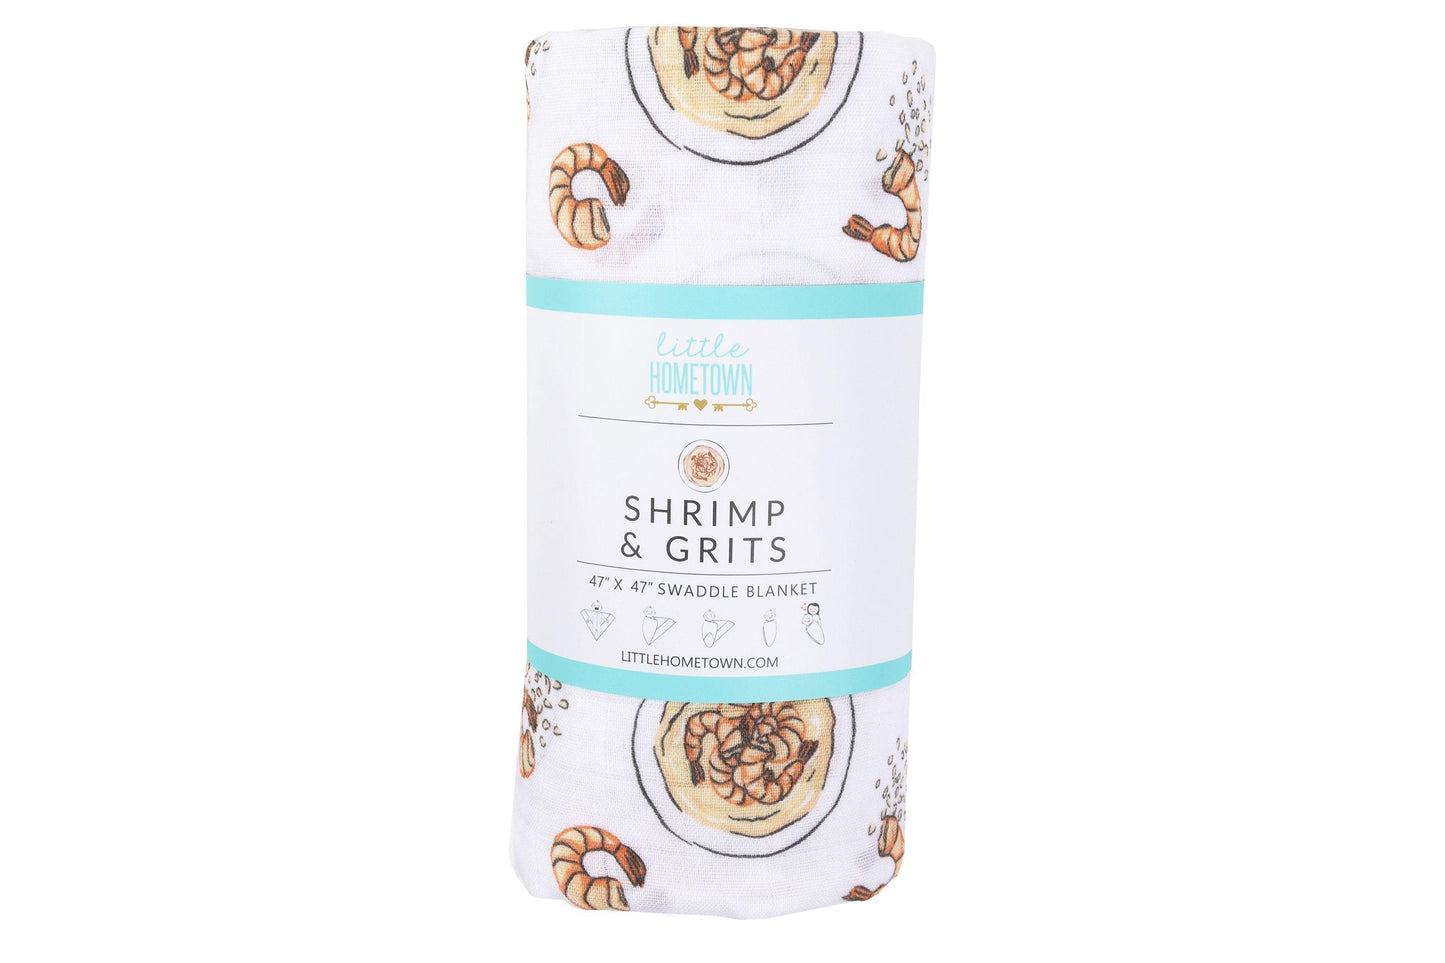 Shrimp and grits-themed baby muslin swaddle blanket and burp cloth set, featuring playful shrimp illustrations.